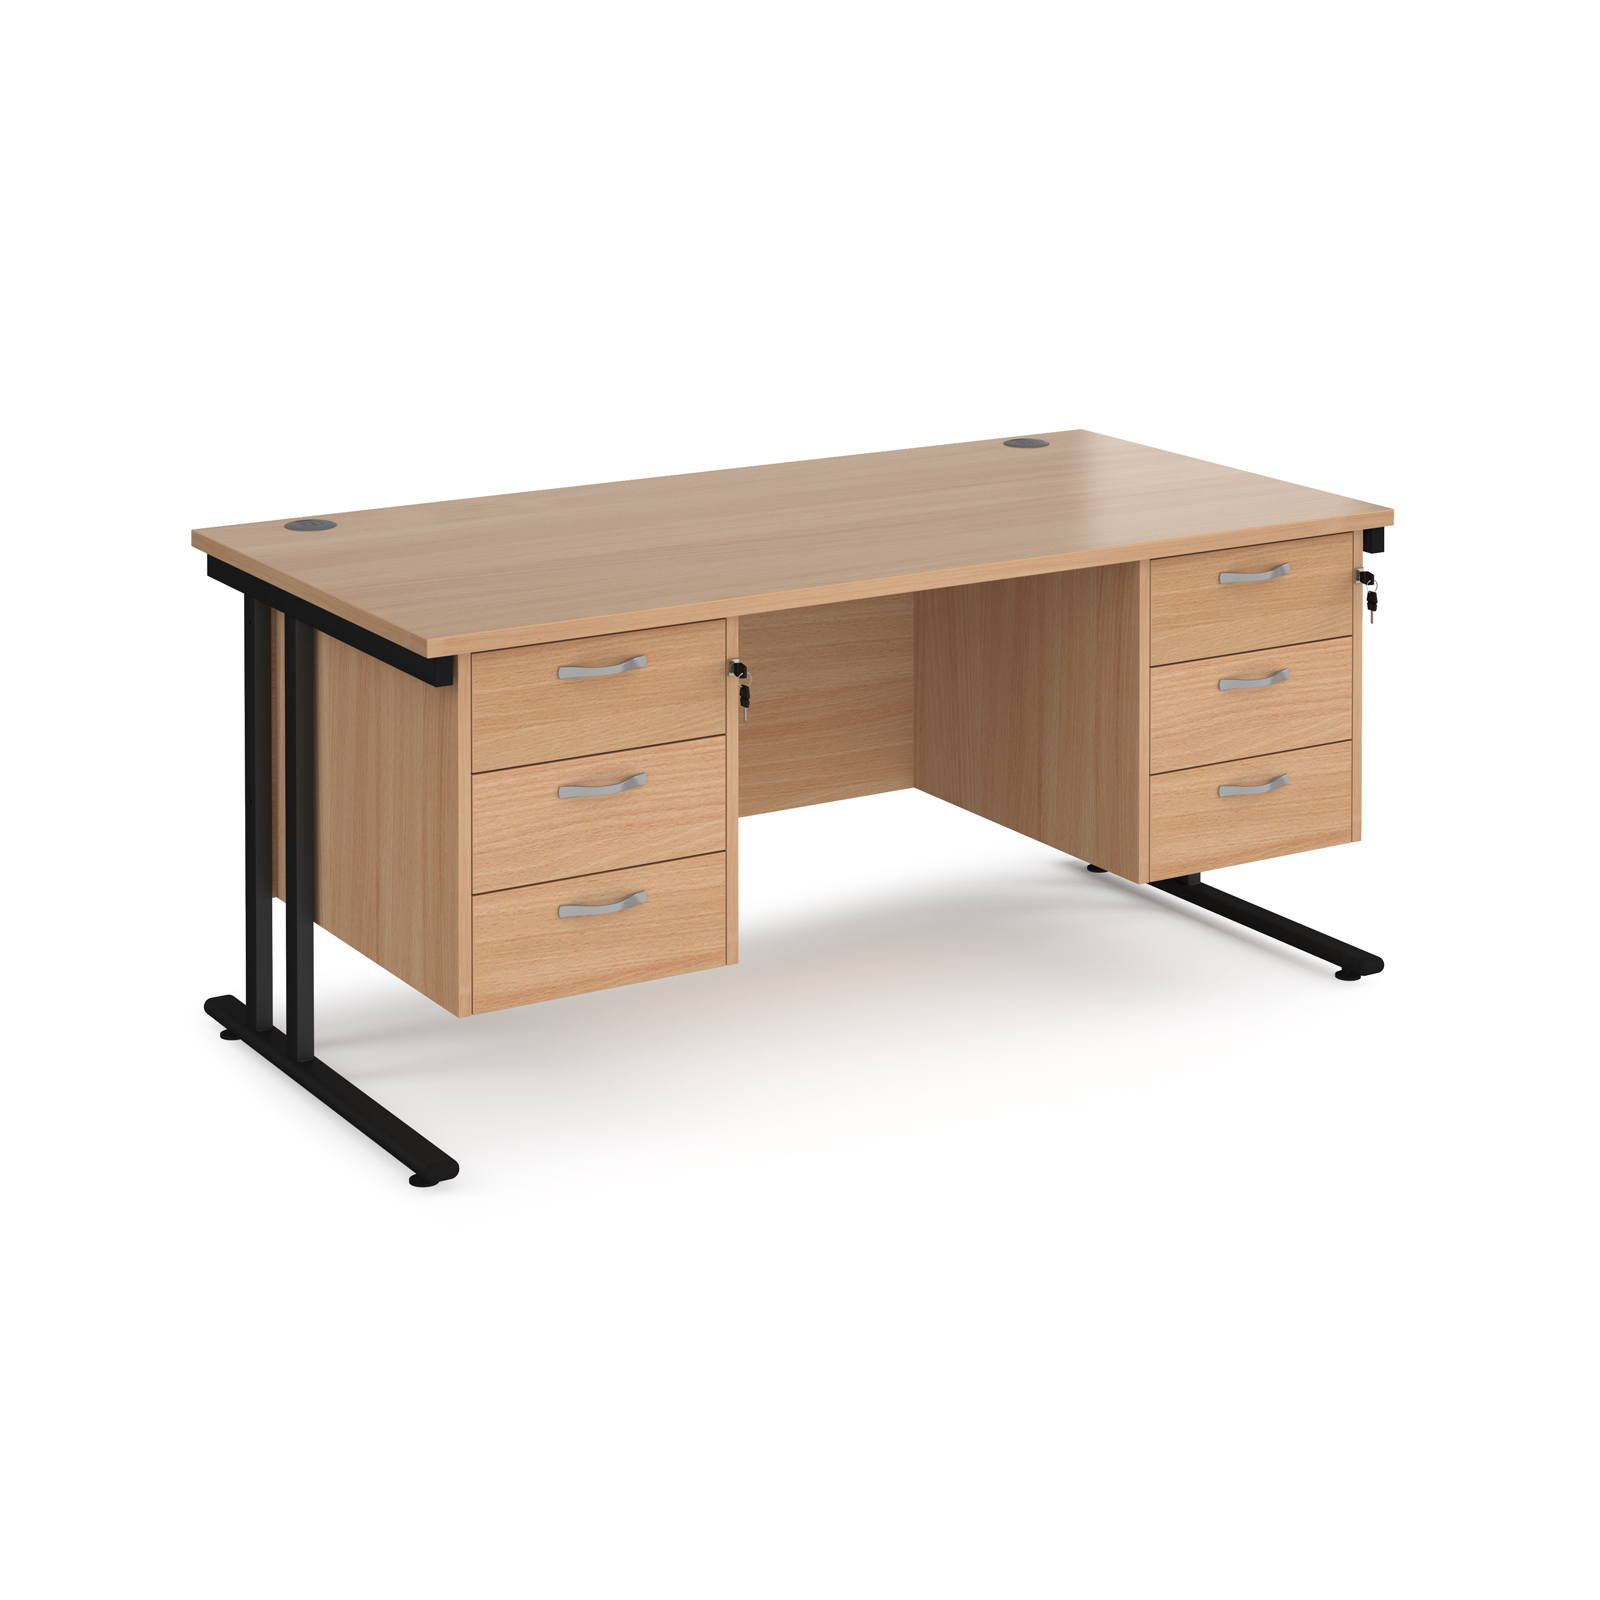 Maestro 25 straight desk 1600mm x 800mm with two x 3 drawer pedestals - black cantilever leg frame, beech top